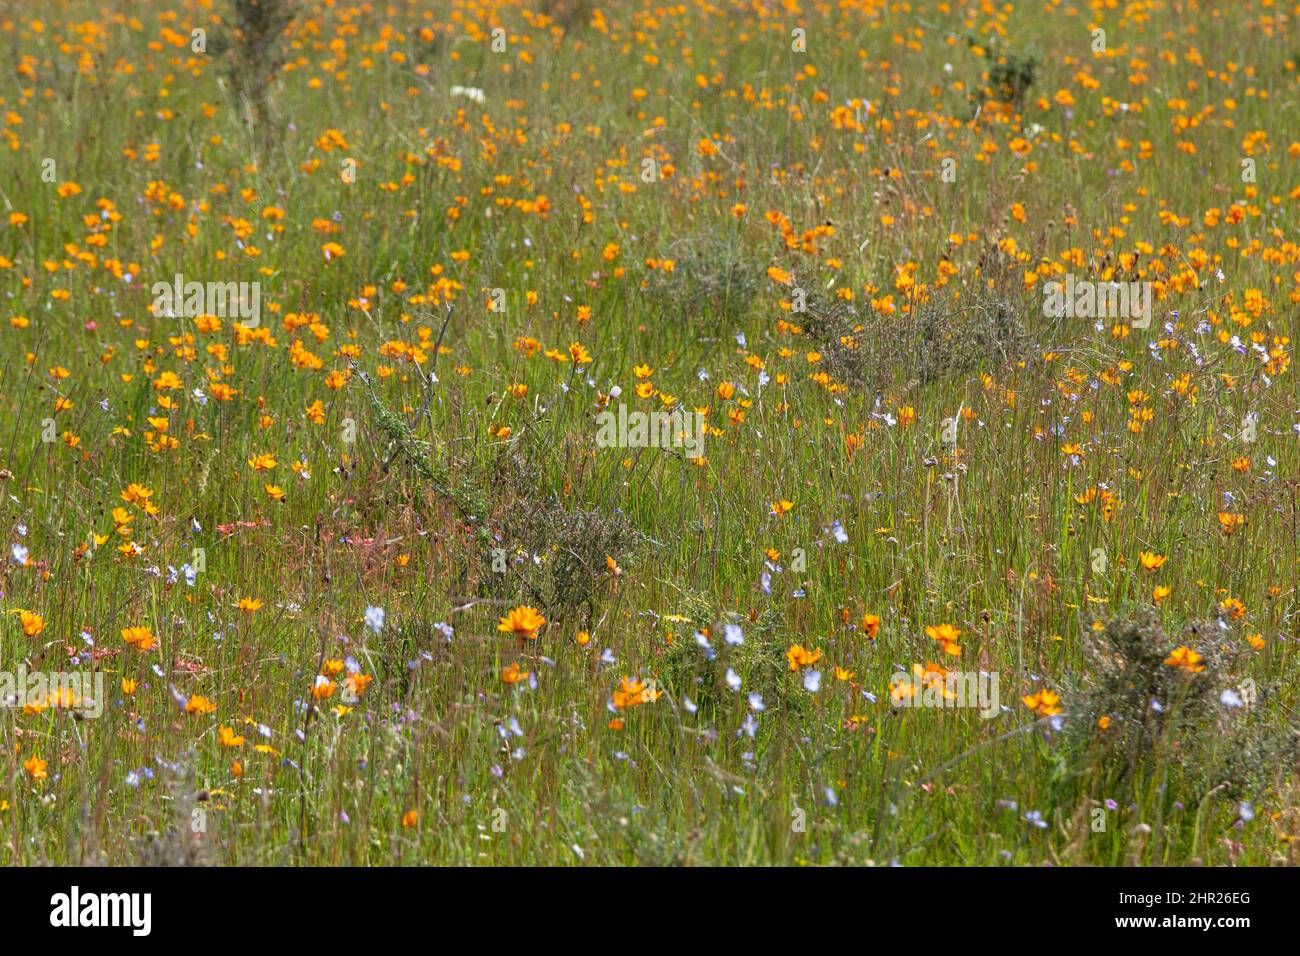 Mass flowering of Ixia maculata in a renoserverld near Darling in the Western Cape of South Africa Stock Photo